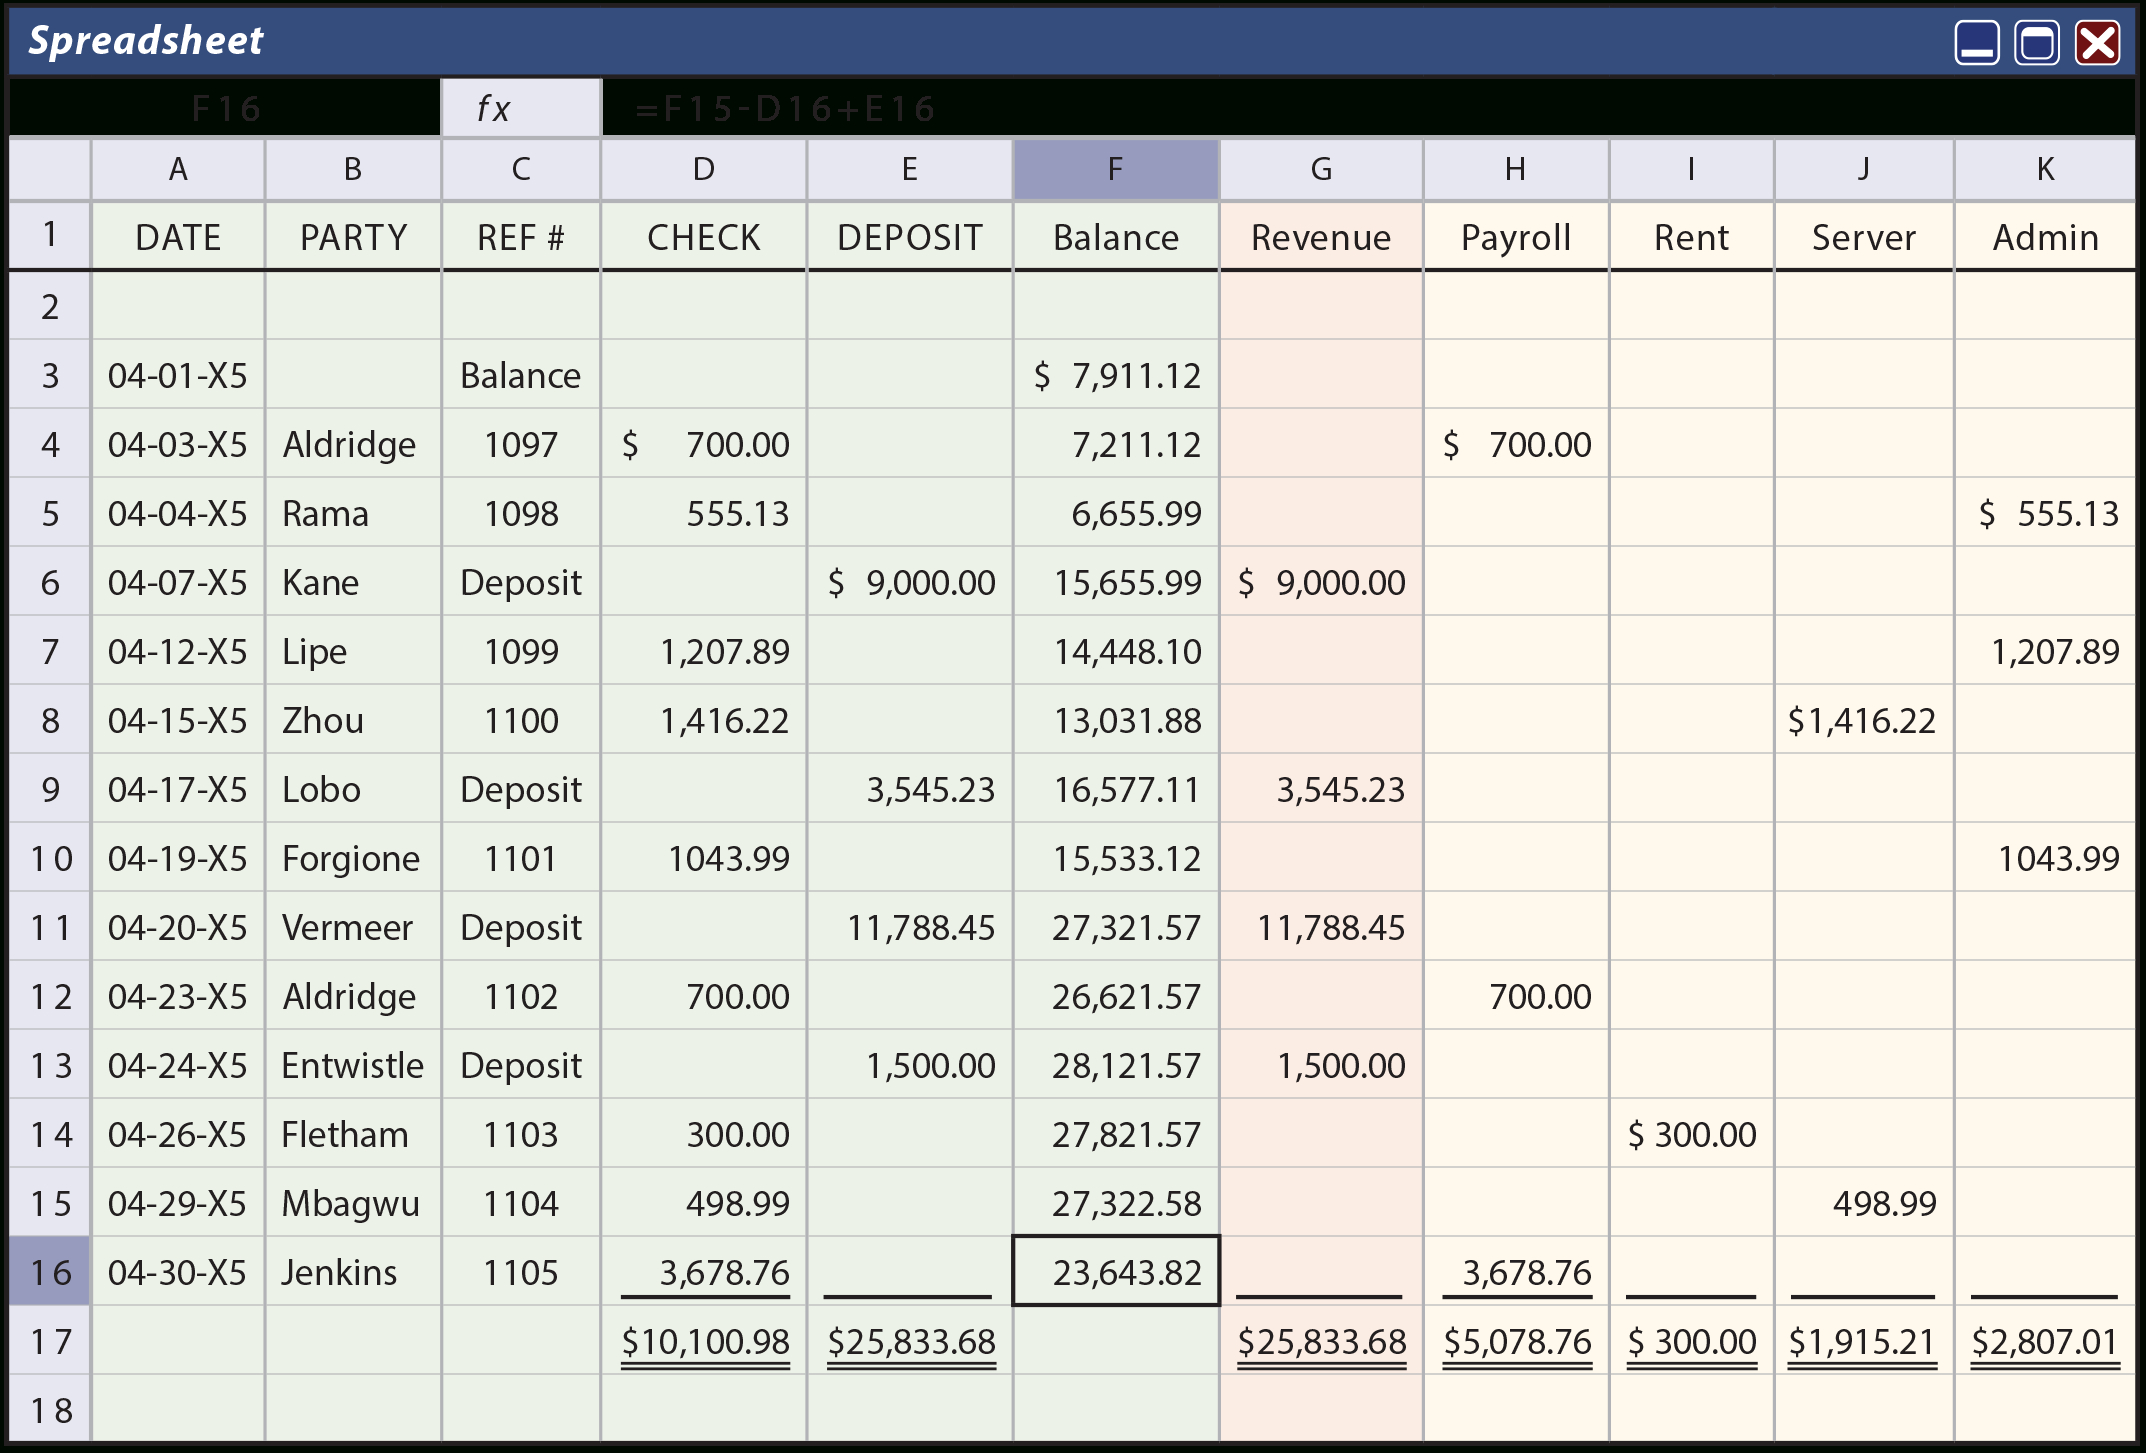 Expense Accrual Spreadsheet Template For Accrual Versus Cashbasis Accounting  Principlesofaccounting